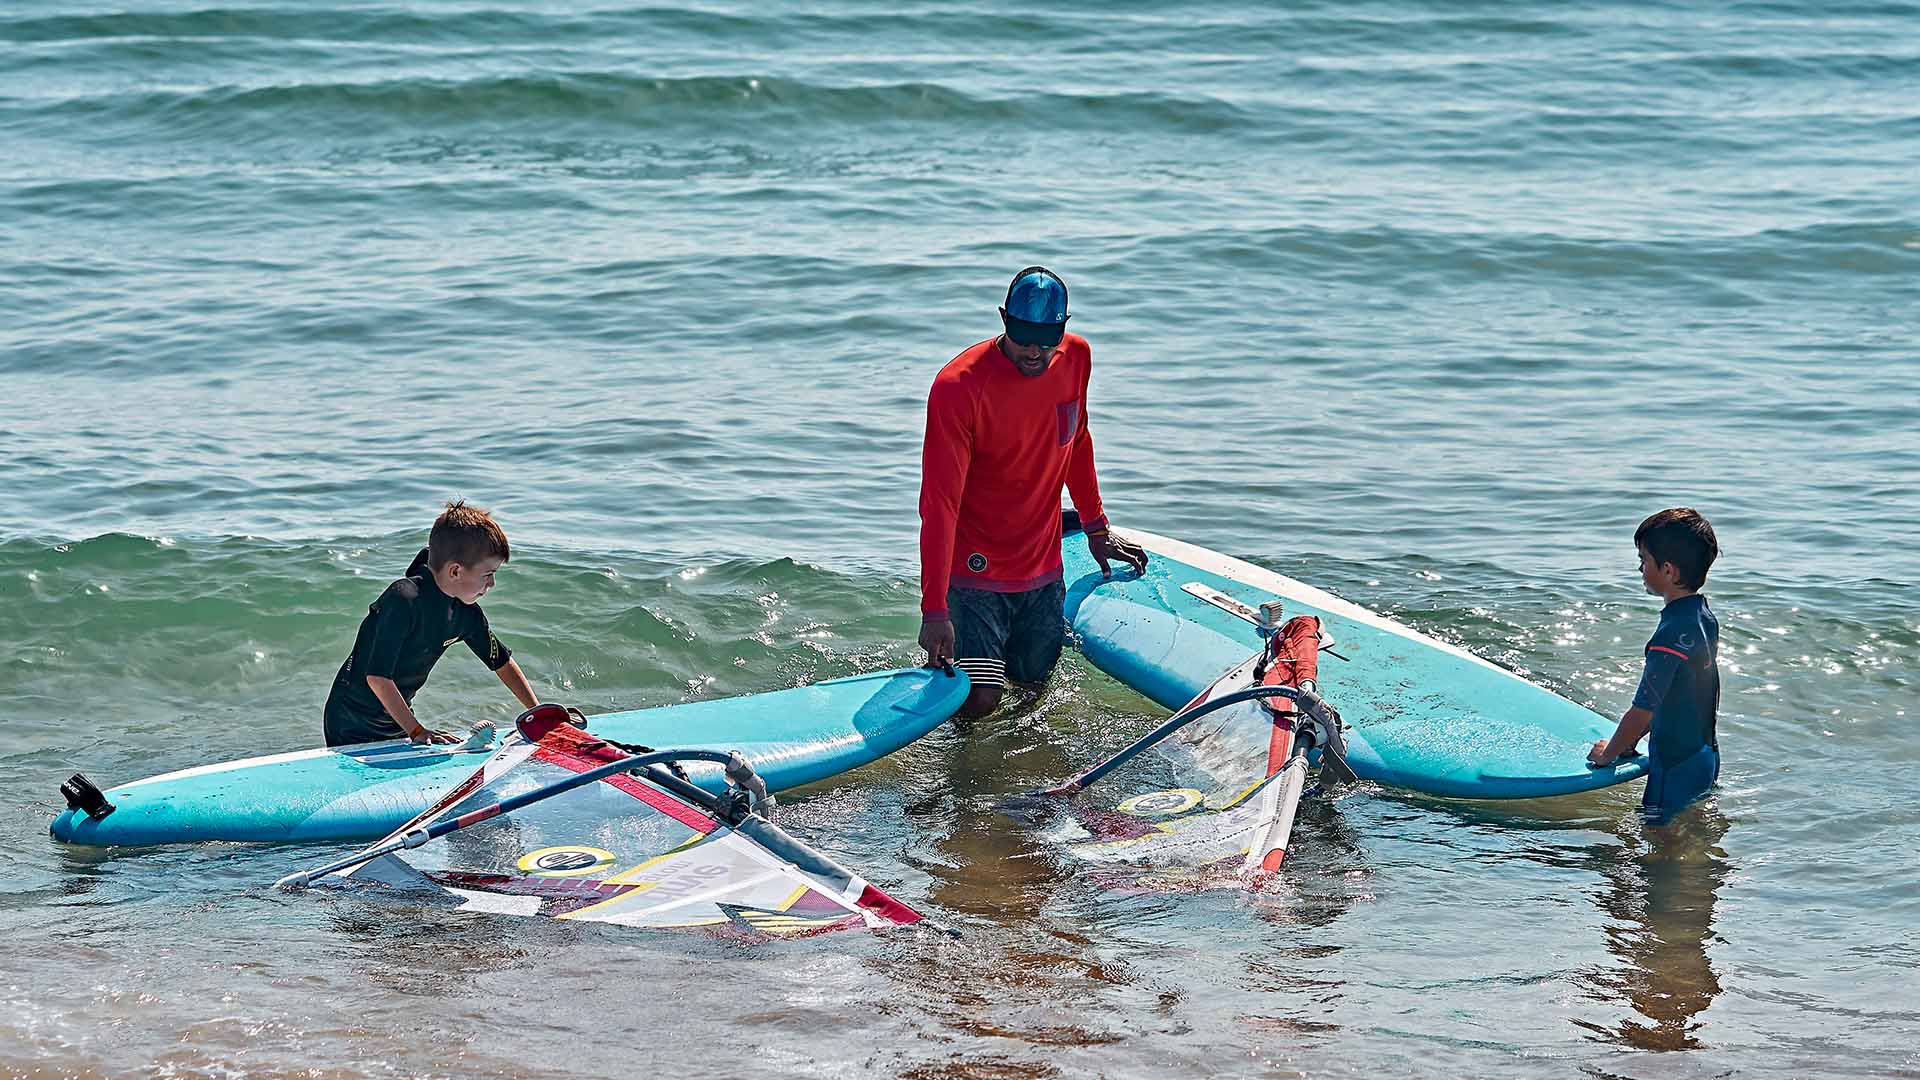 windsurf lessons with two children listening the instructor